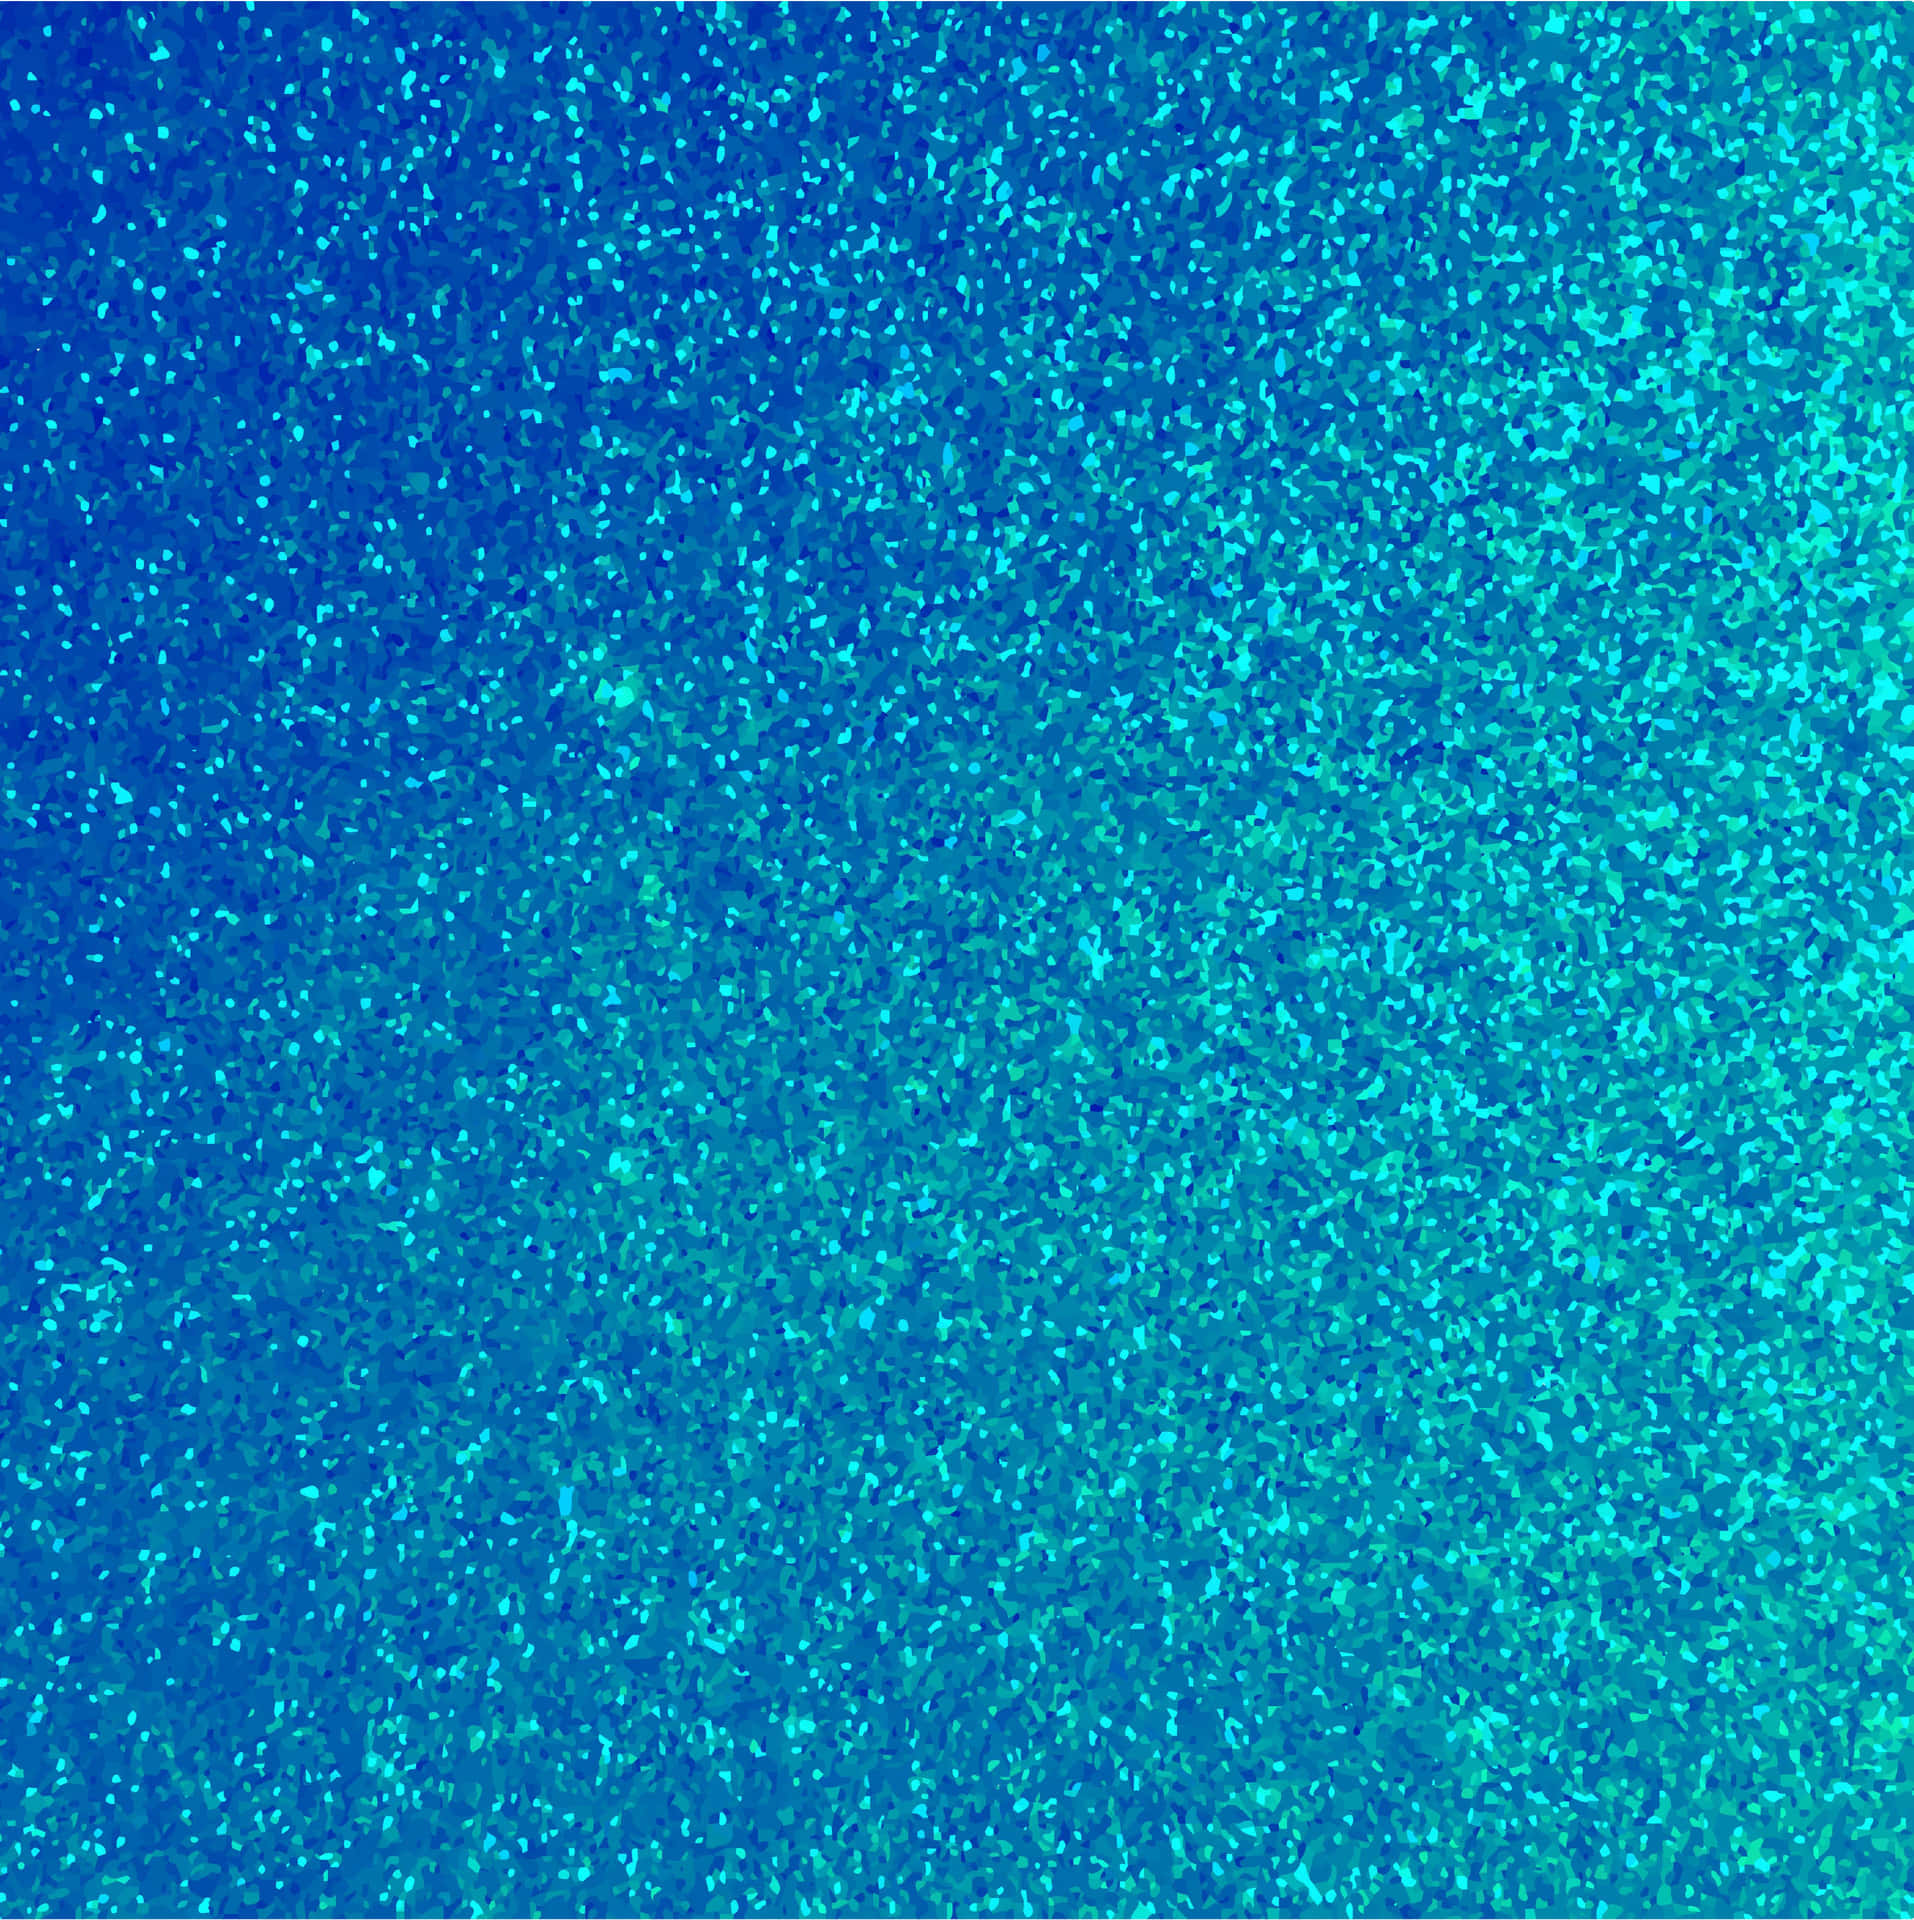 Oceanic And Sparkly Blue Background